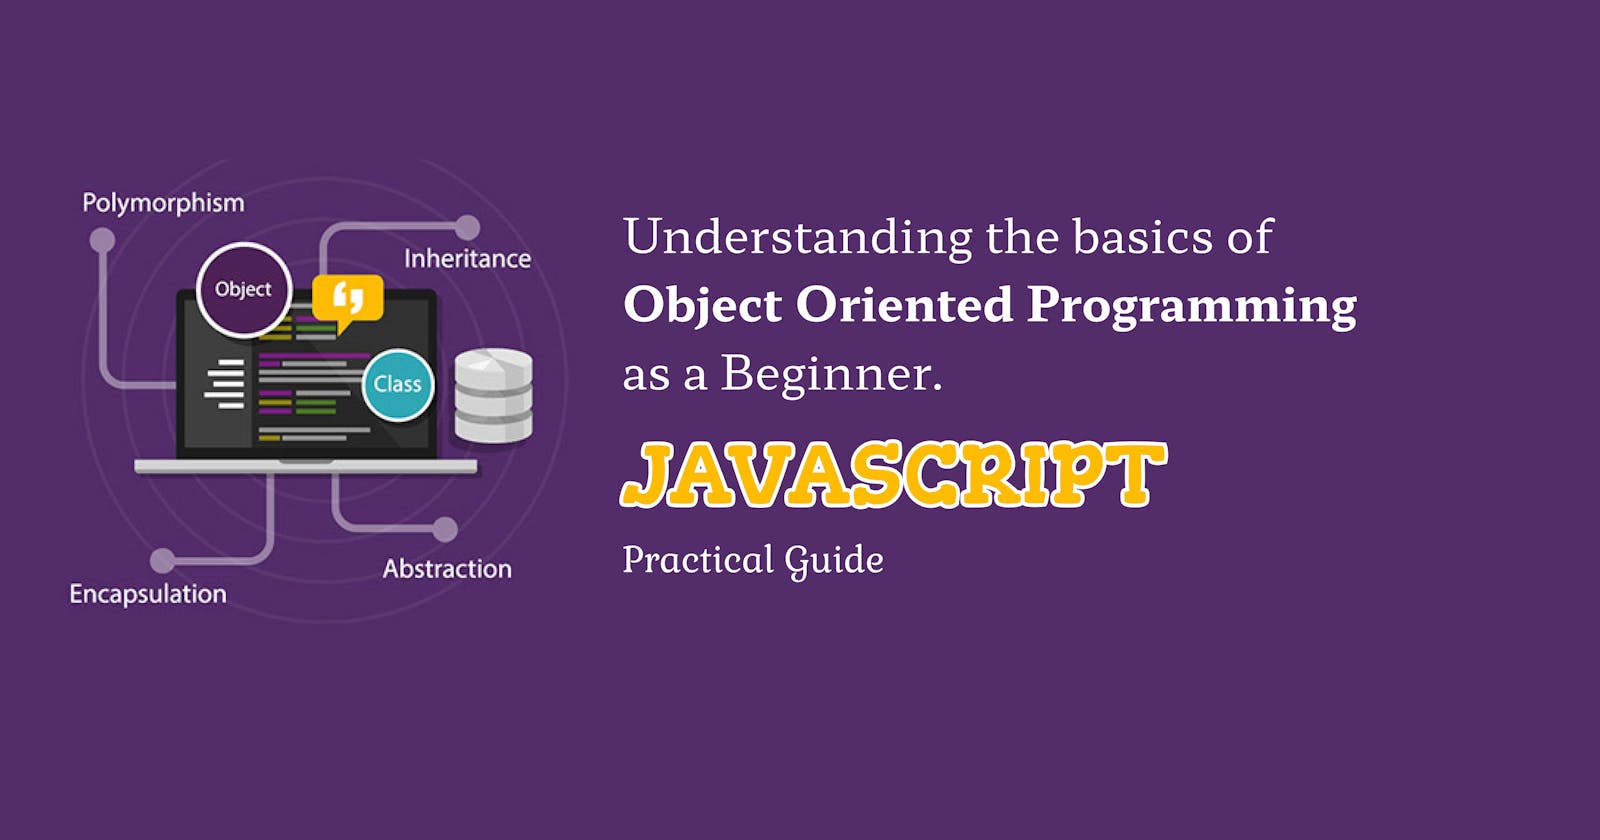 Understanding the basics of Object Oriented Programming as a Beginner